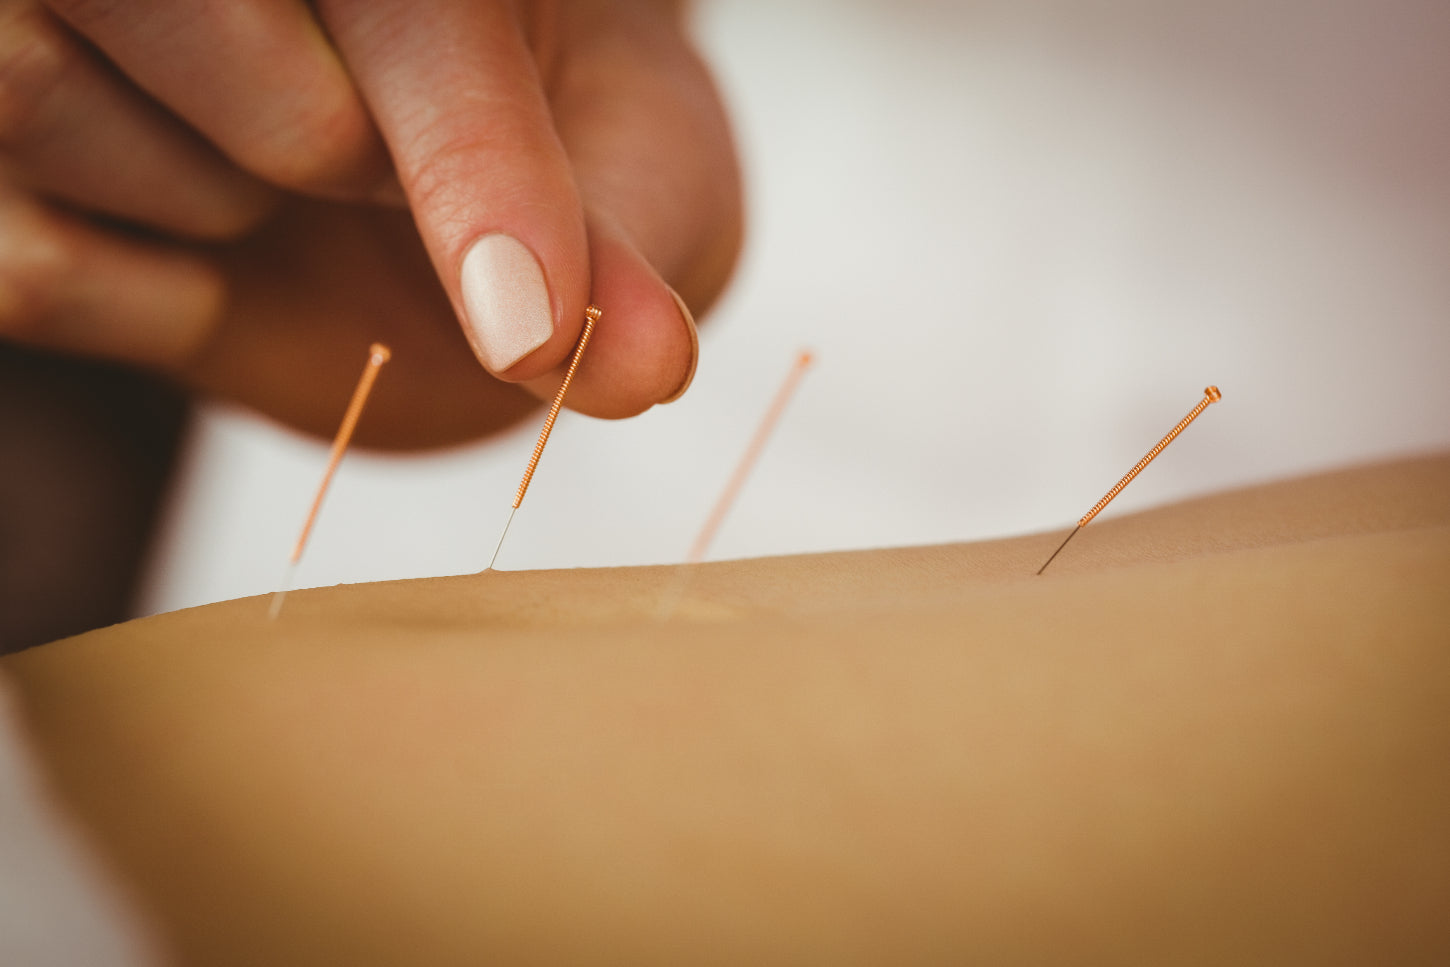 young woman getting acupuncture vs massage by professional